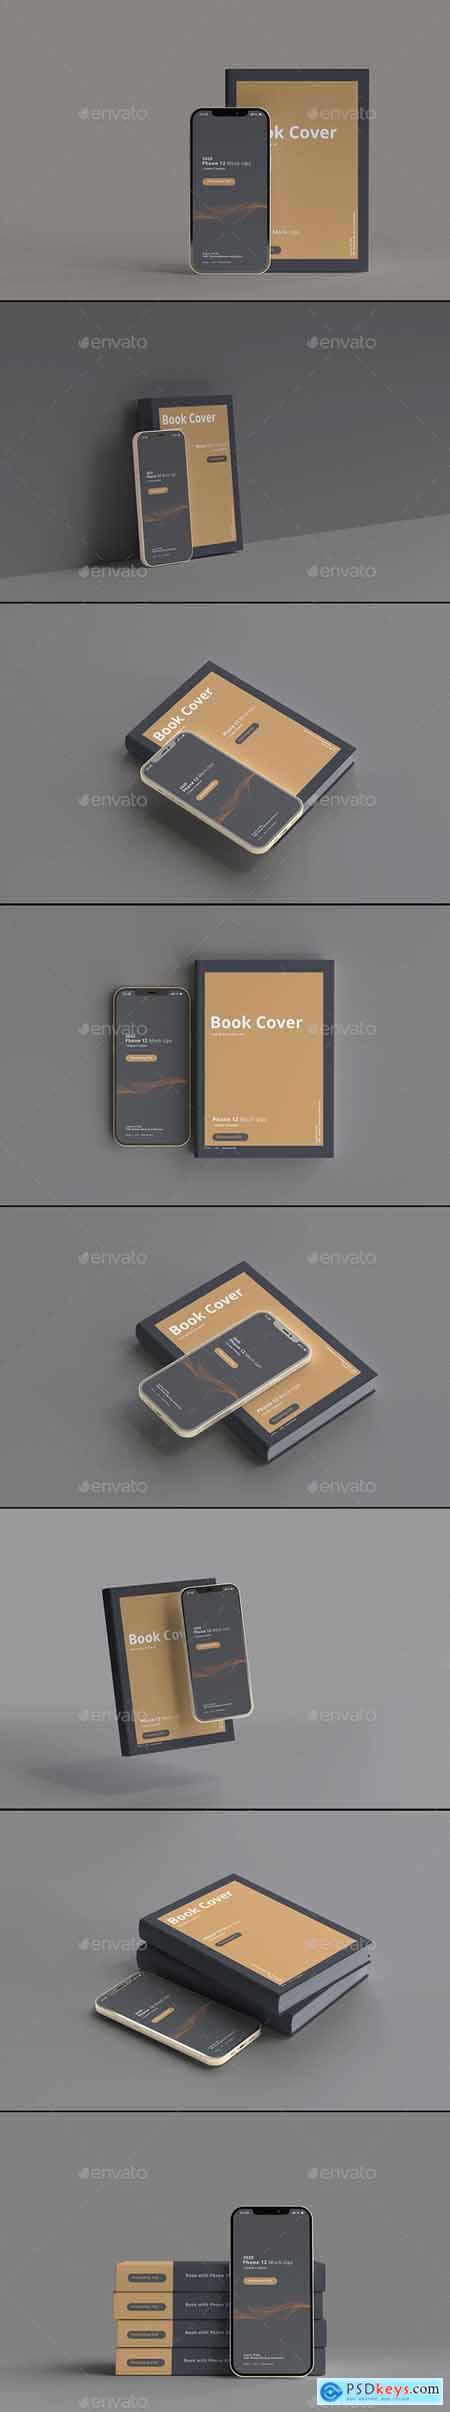 2020 Smart Phone 12 Mockups with Book Cover 29123345